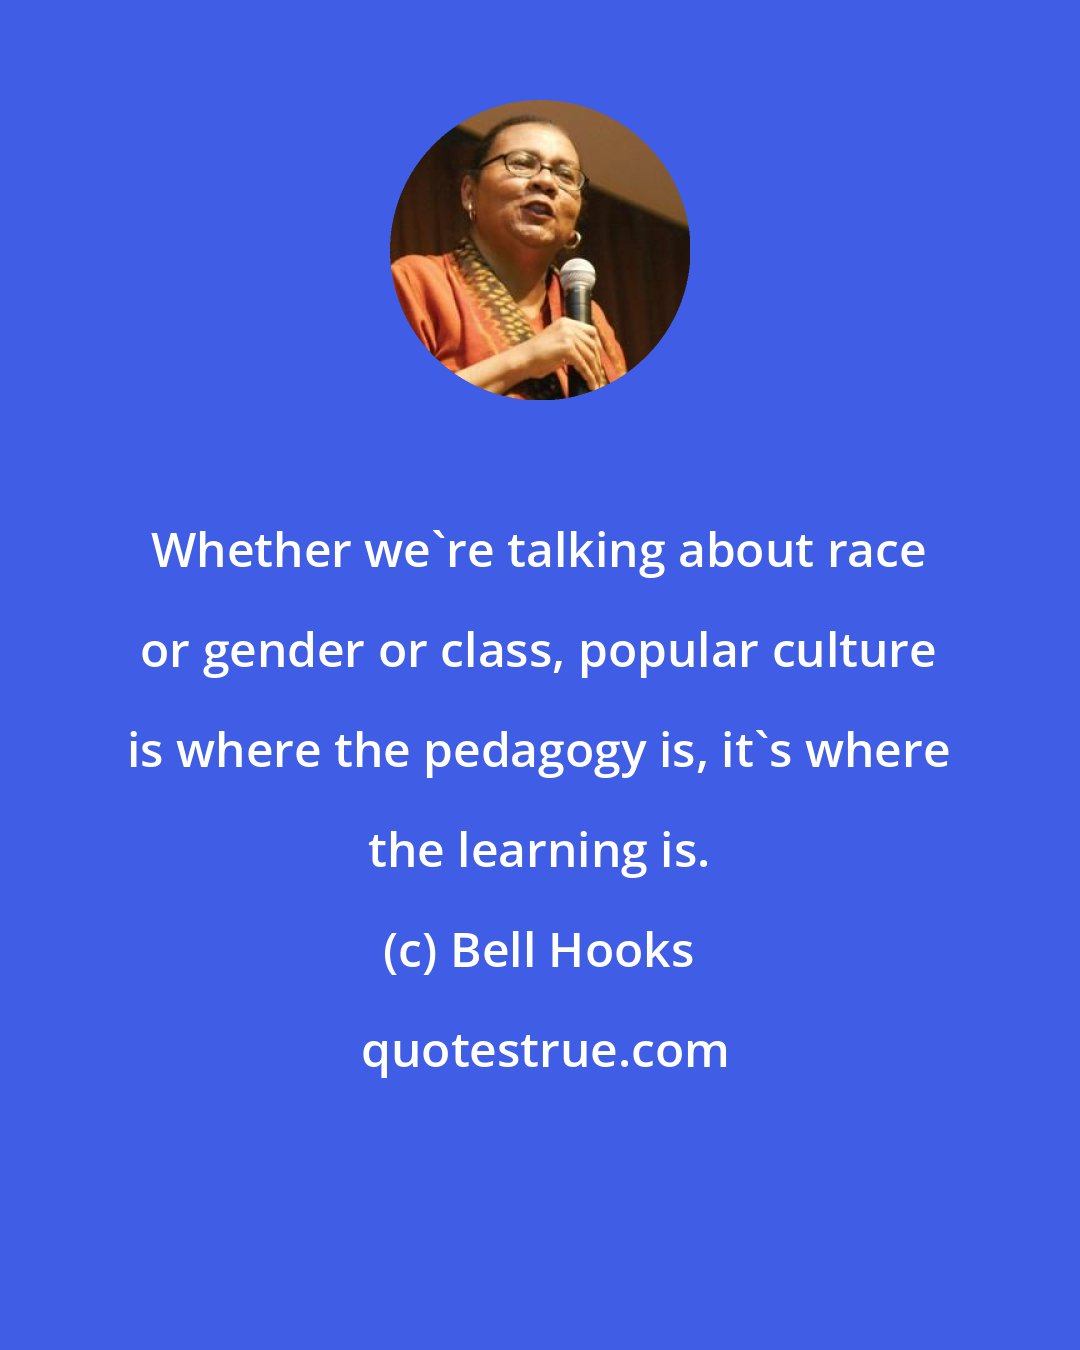 Bell Hooks: Whether we're talking about race or gender or class, popular culture is where the pedagogy is, it's where the learning is.